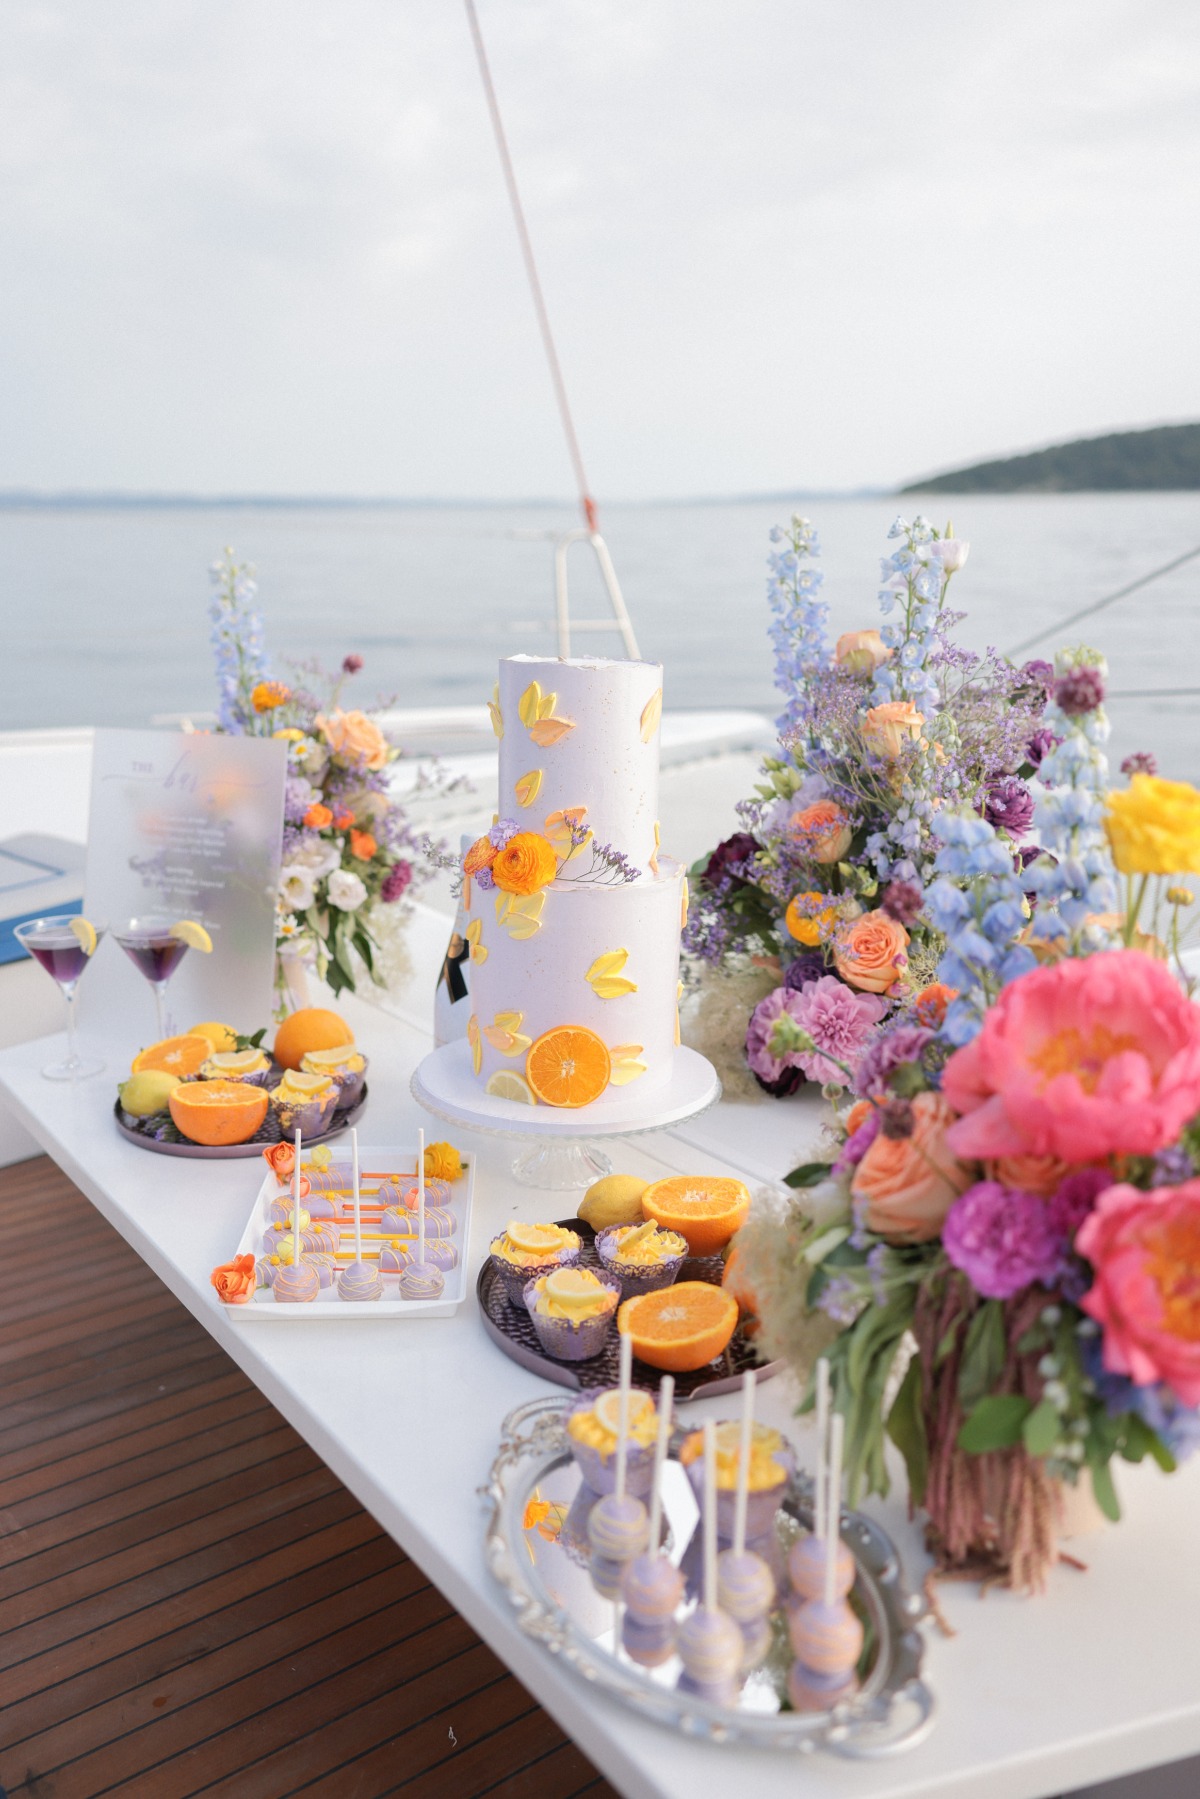 Dessert table on yacht with customized drinks, colorful arrangements, and floral cake